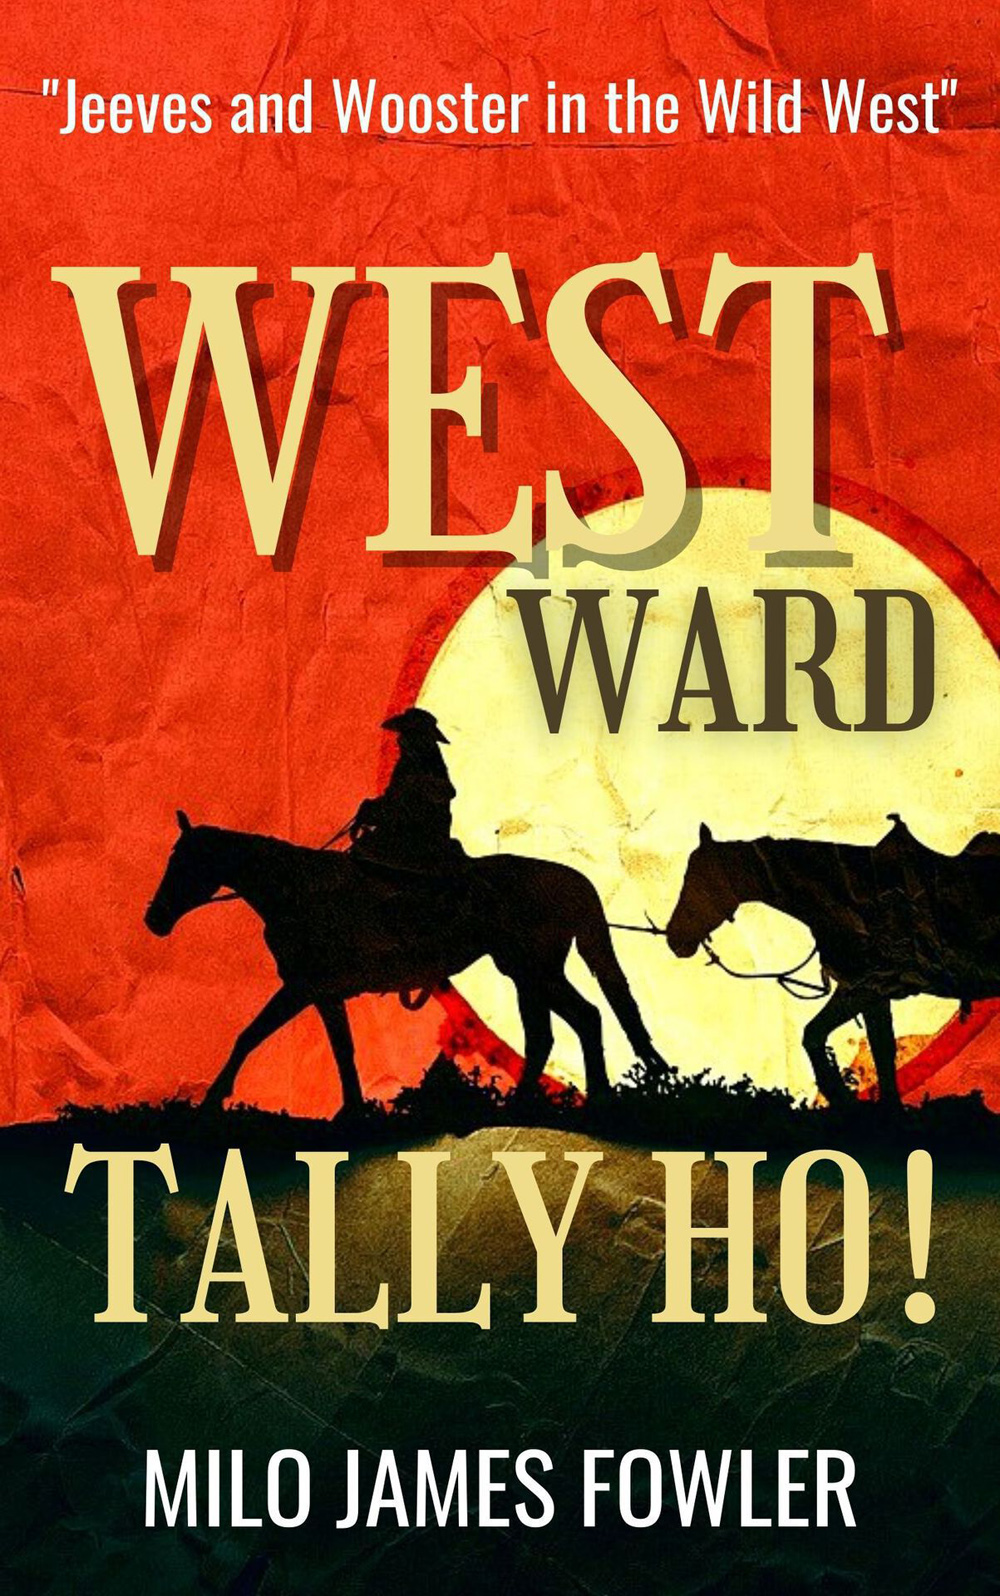 The silhouettes of horses and a cowboy in front of a blistering sun on the cover of "Westward, Tally Ho!'